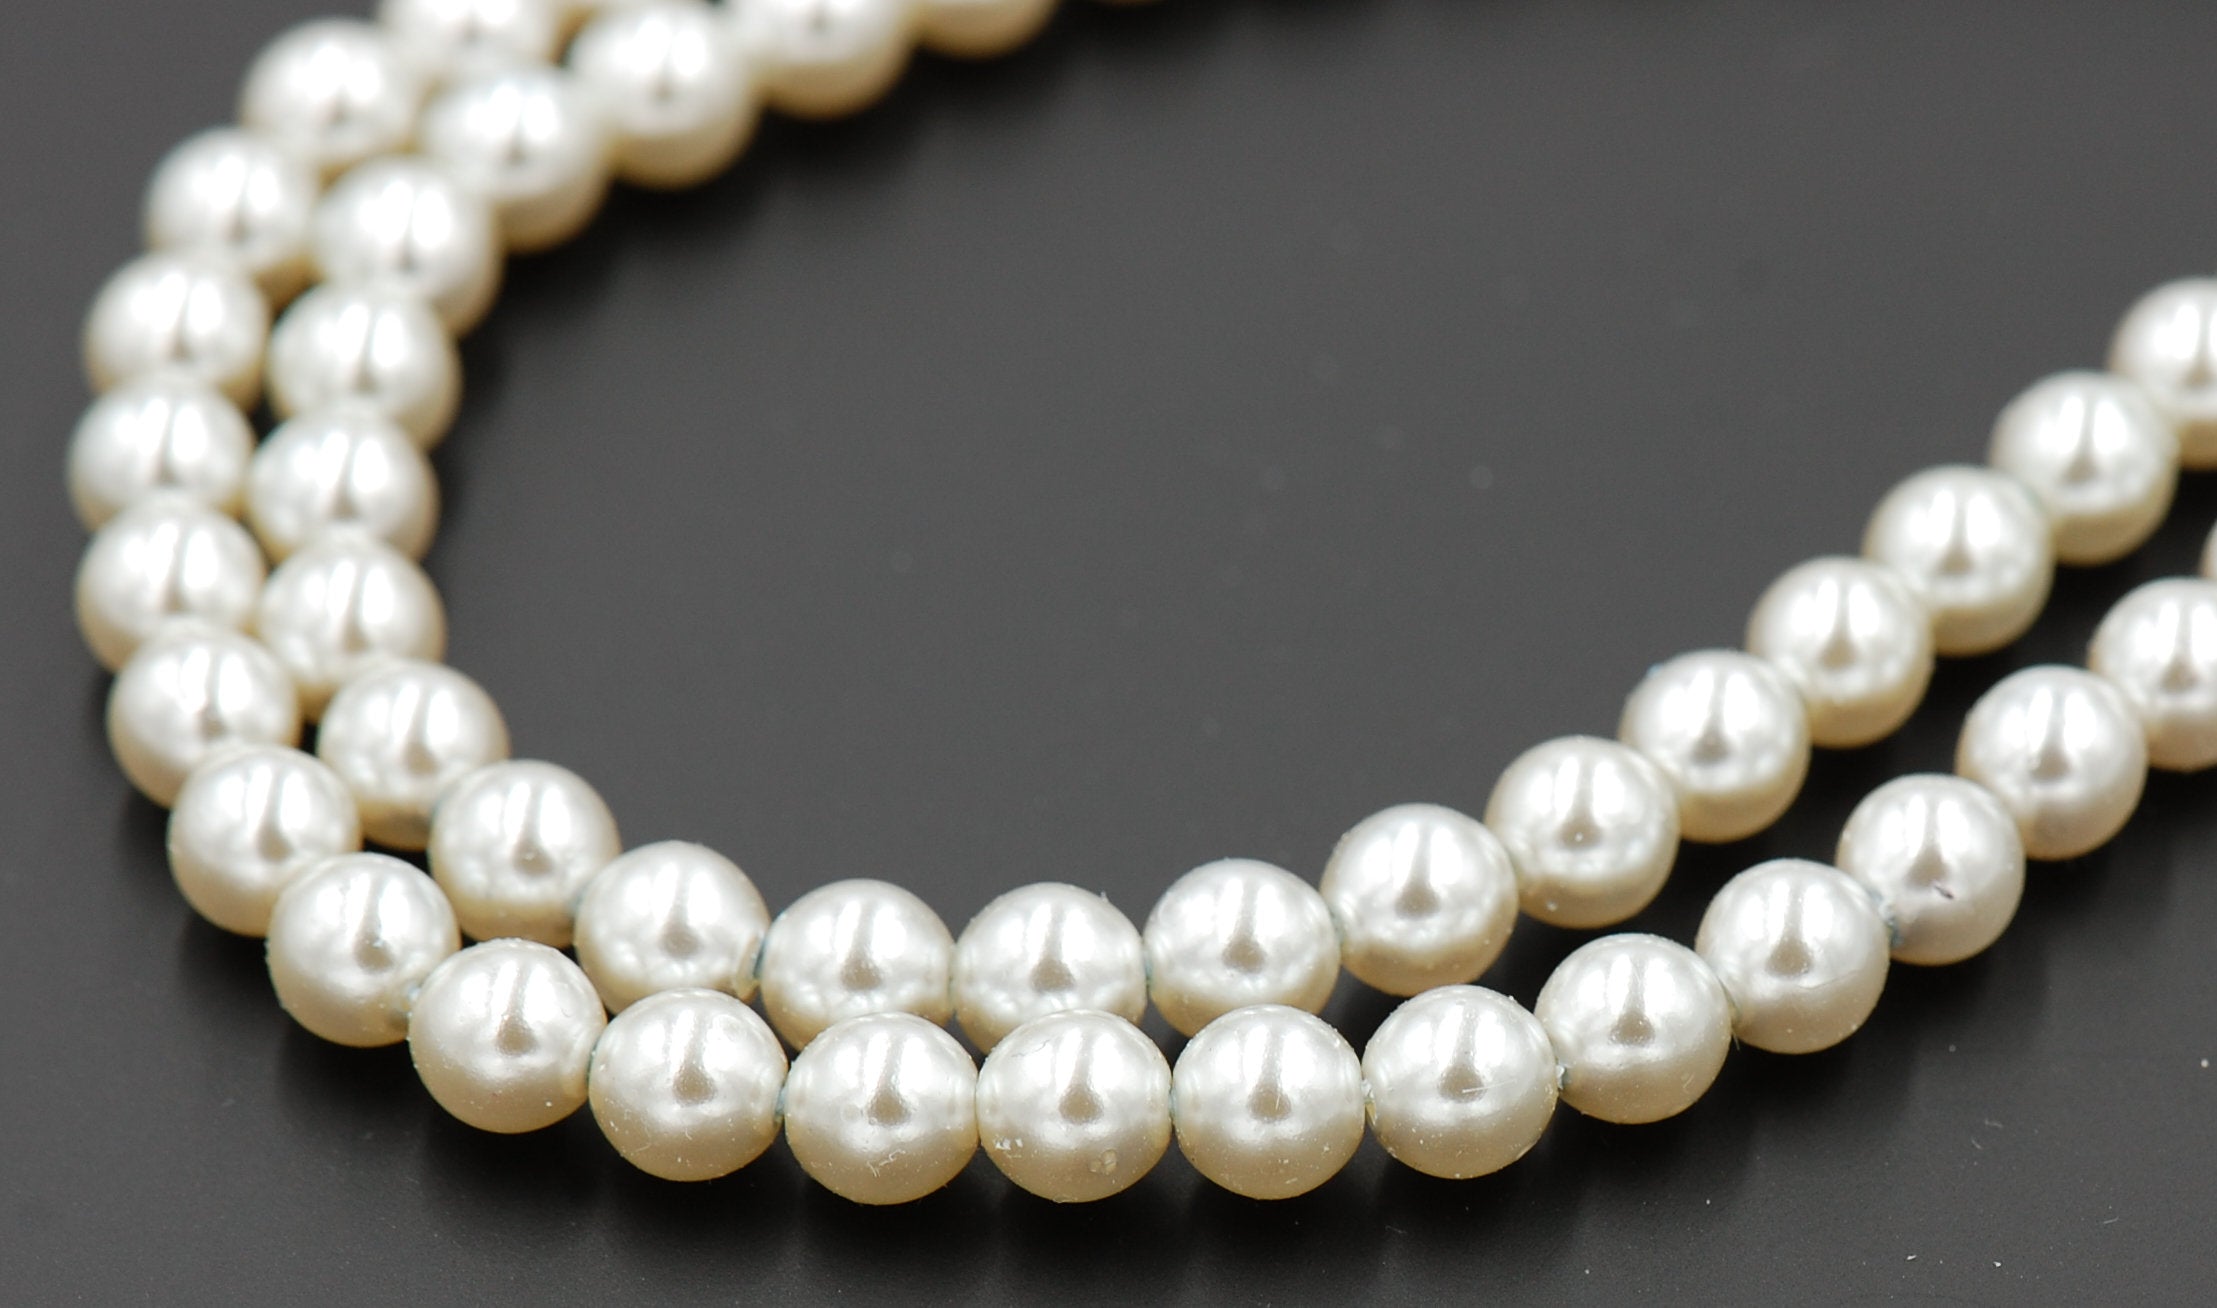 Czech Glass Pearl Coated Lace White Beads 4mm, 6mm, 8mm